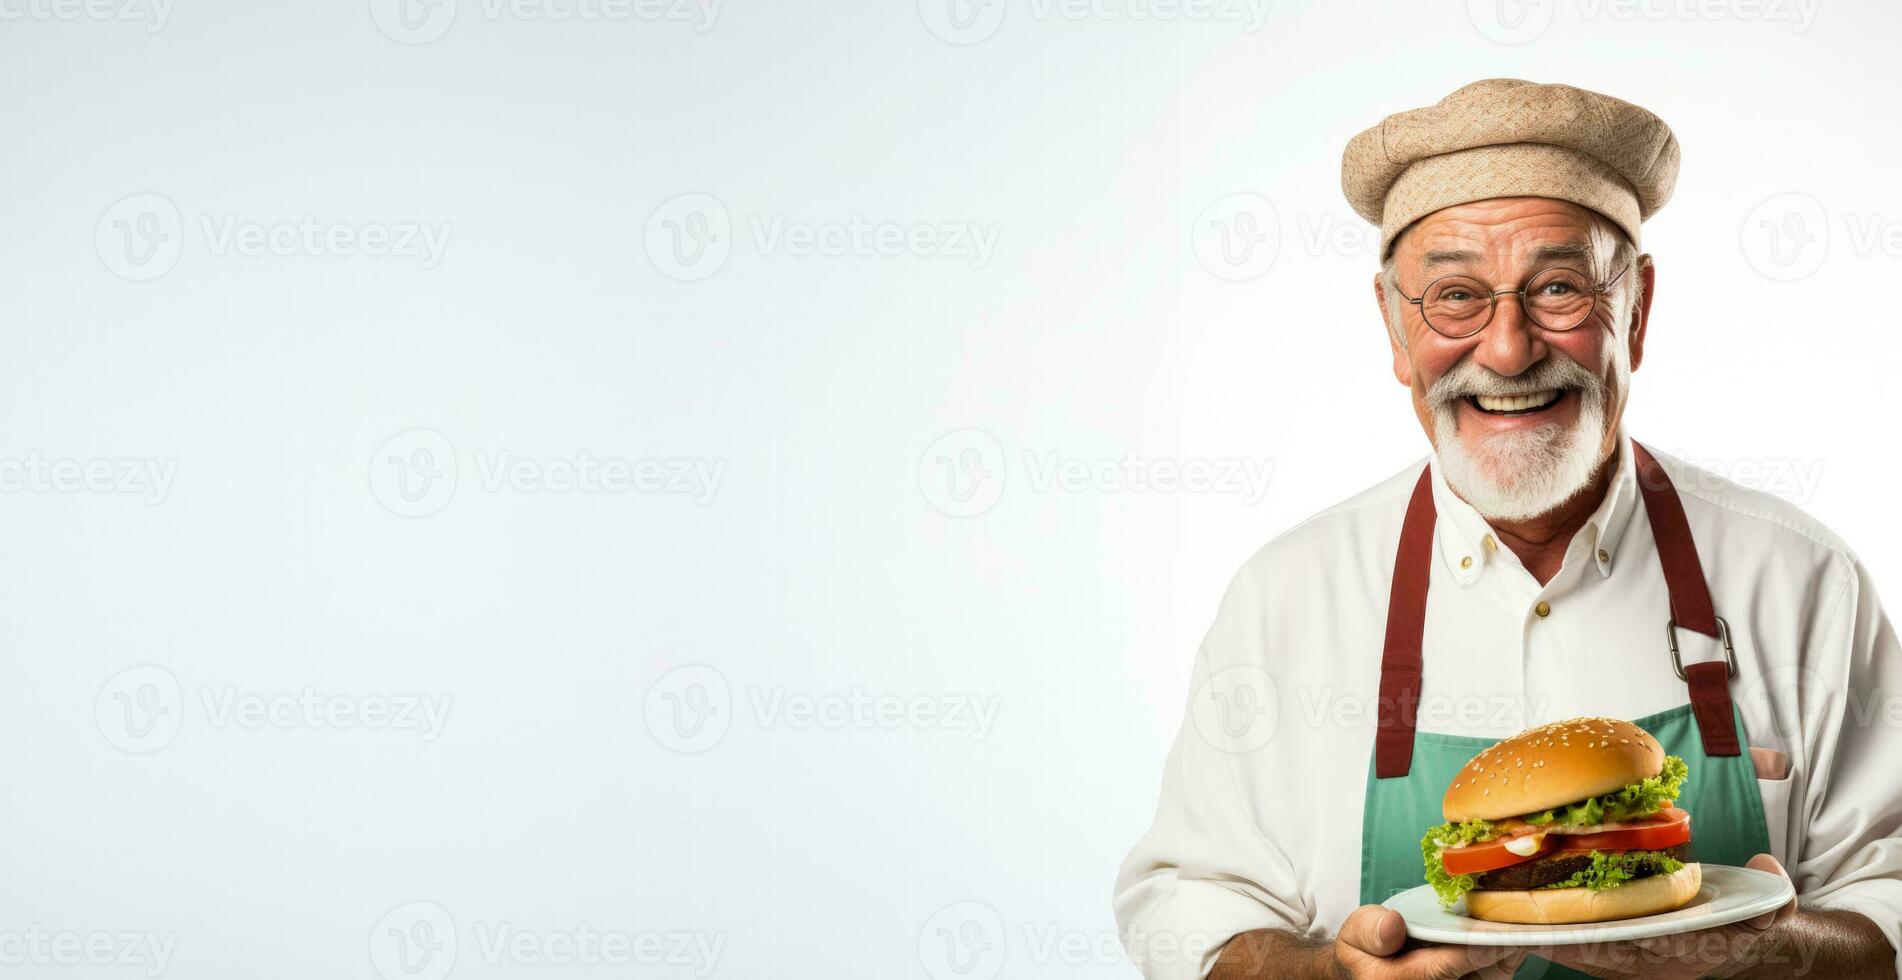 Elderly man relishing a burger meal at retro diner isolated on a white background photo